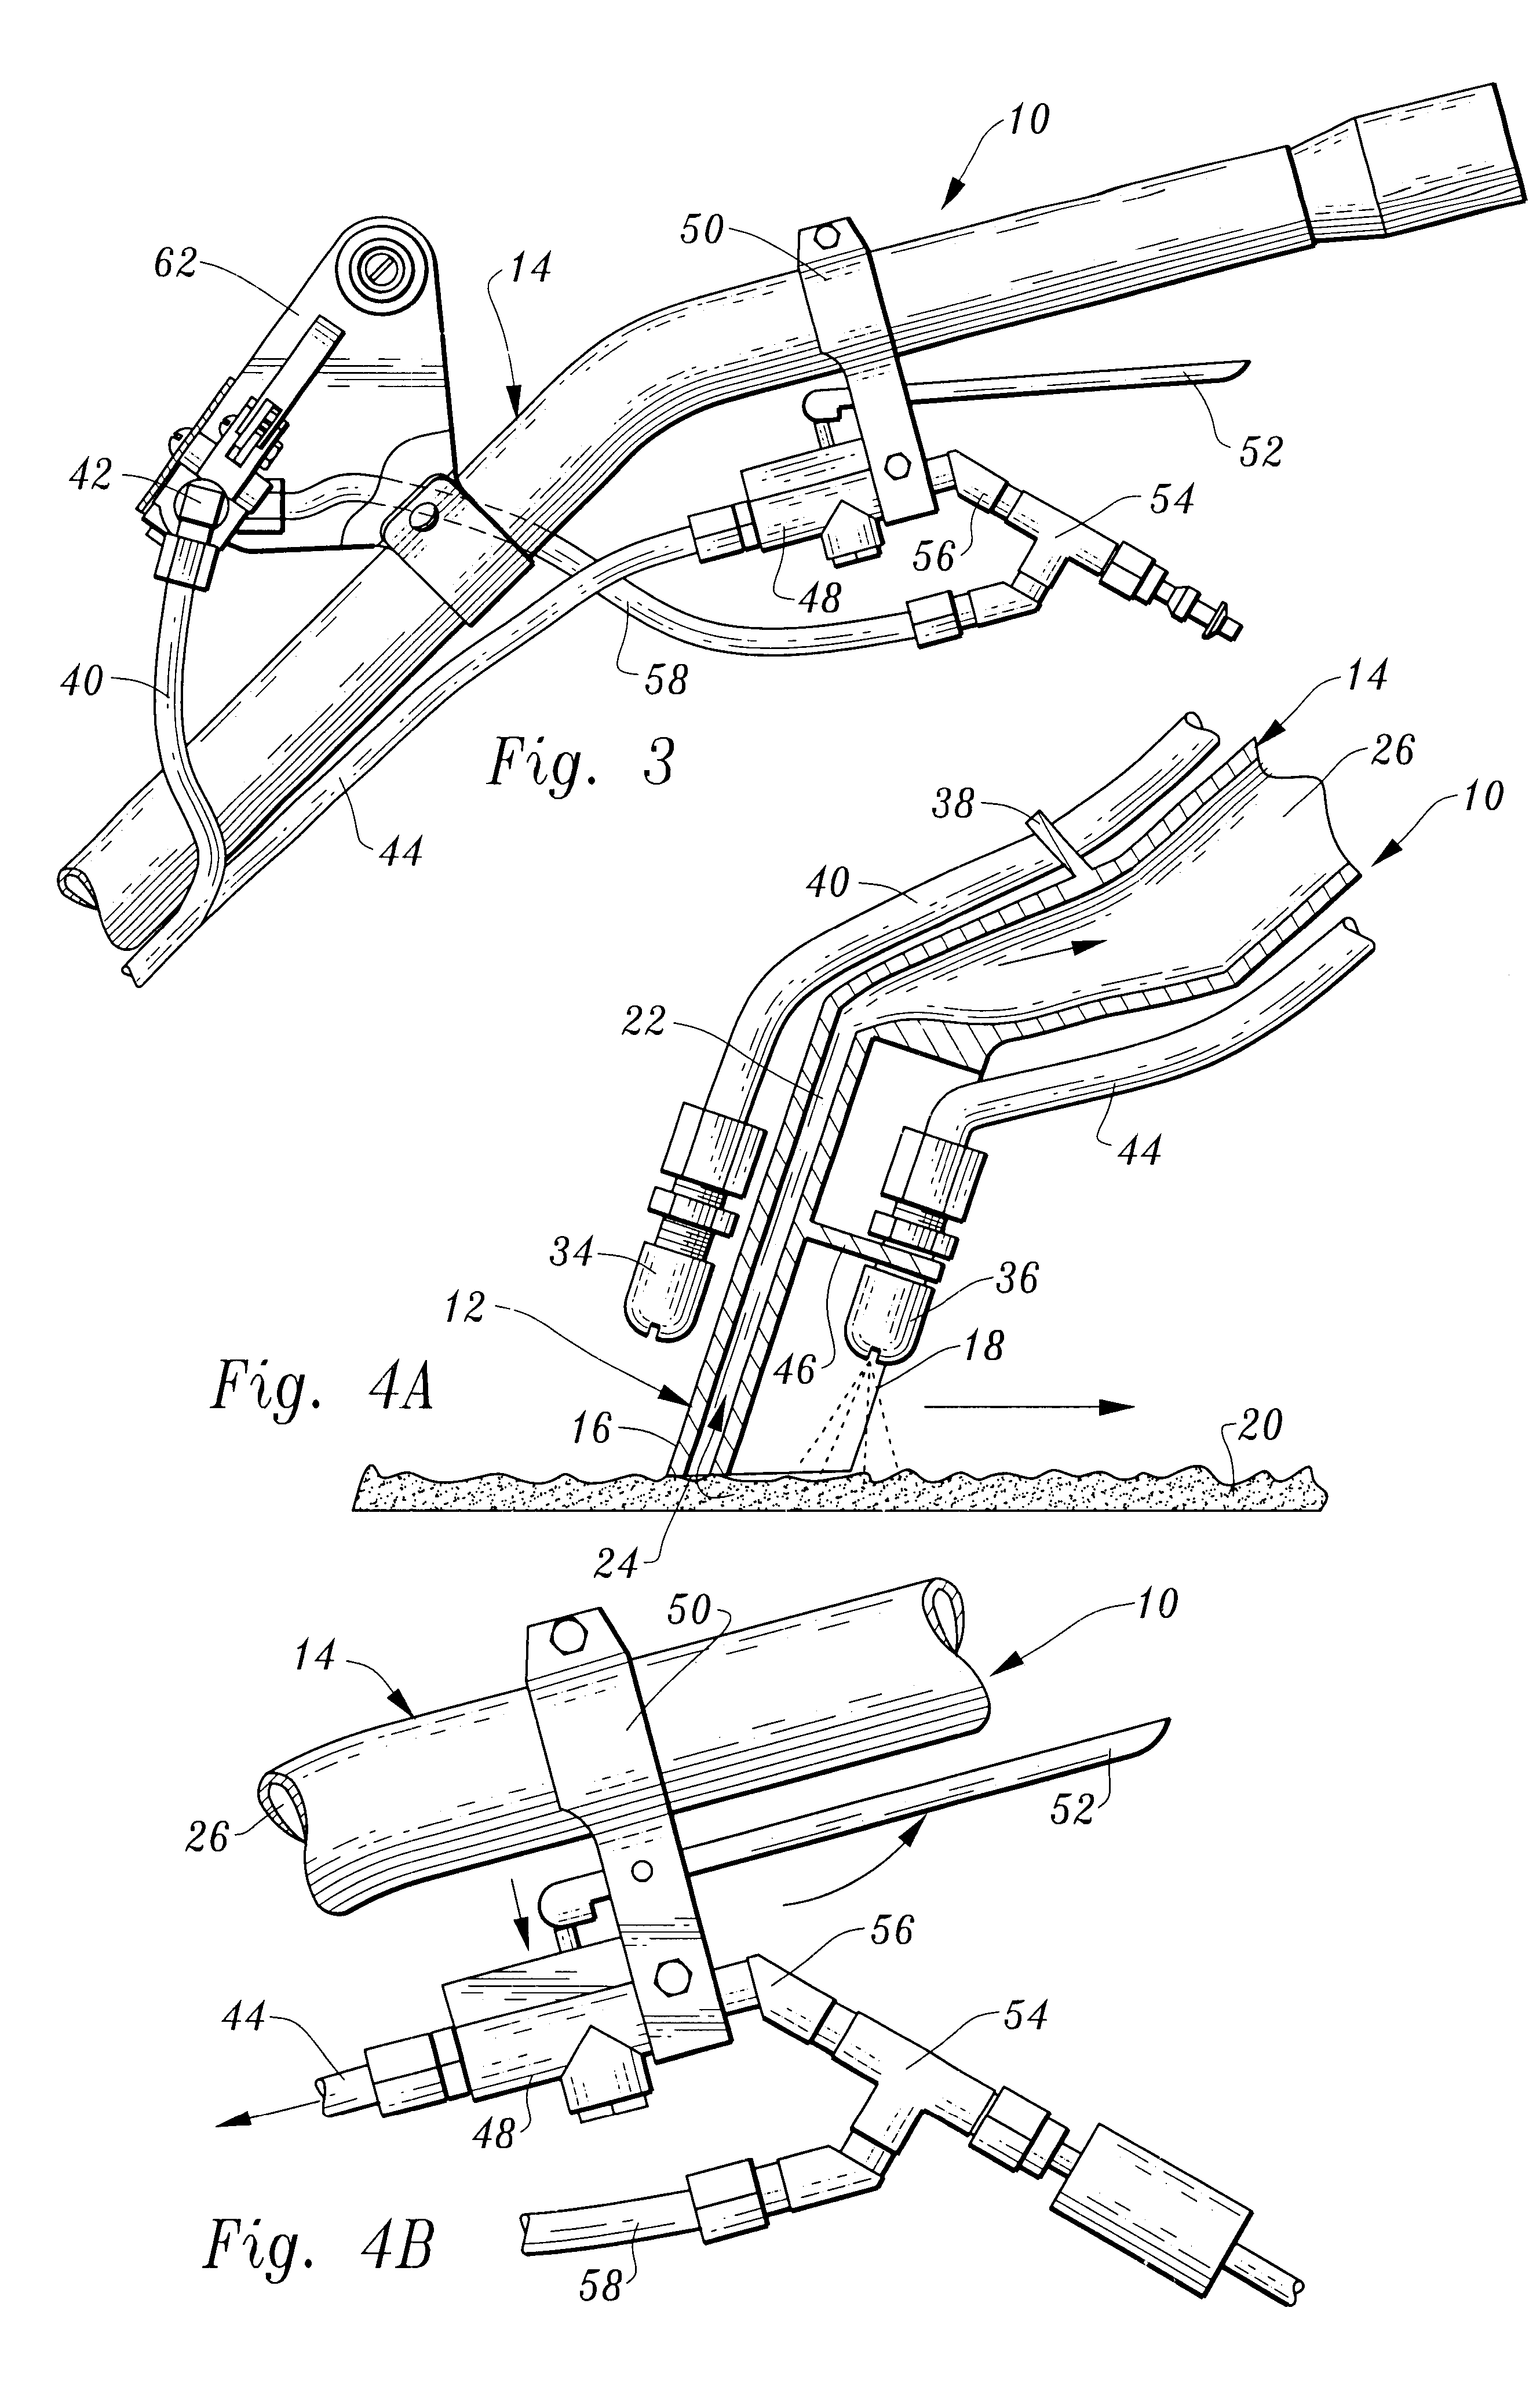 Carpet steam cleaning apparatus with control for directing spray at front or back of wand vacuum head